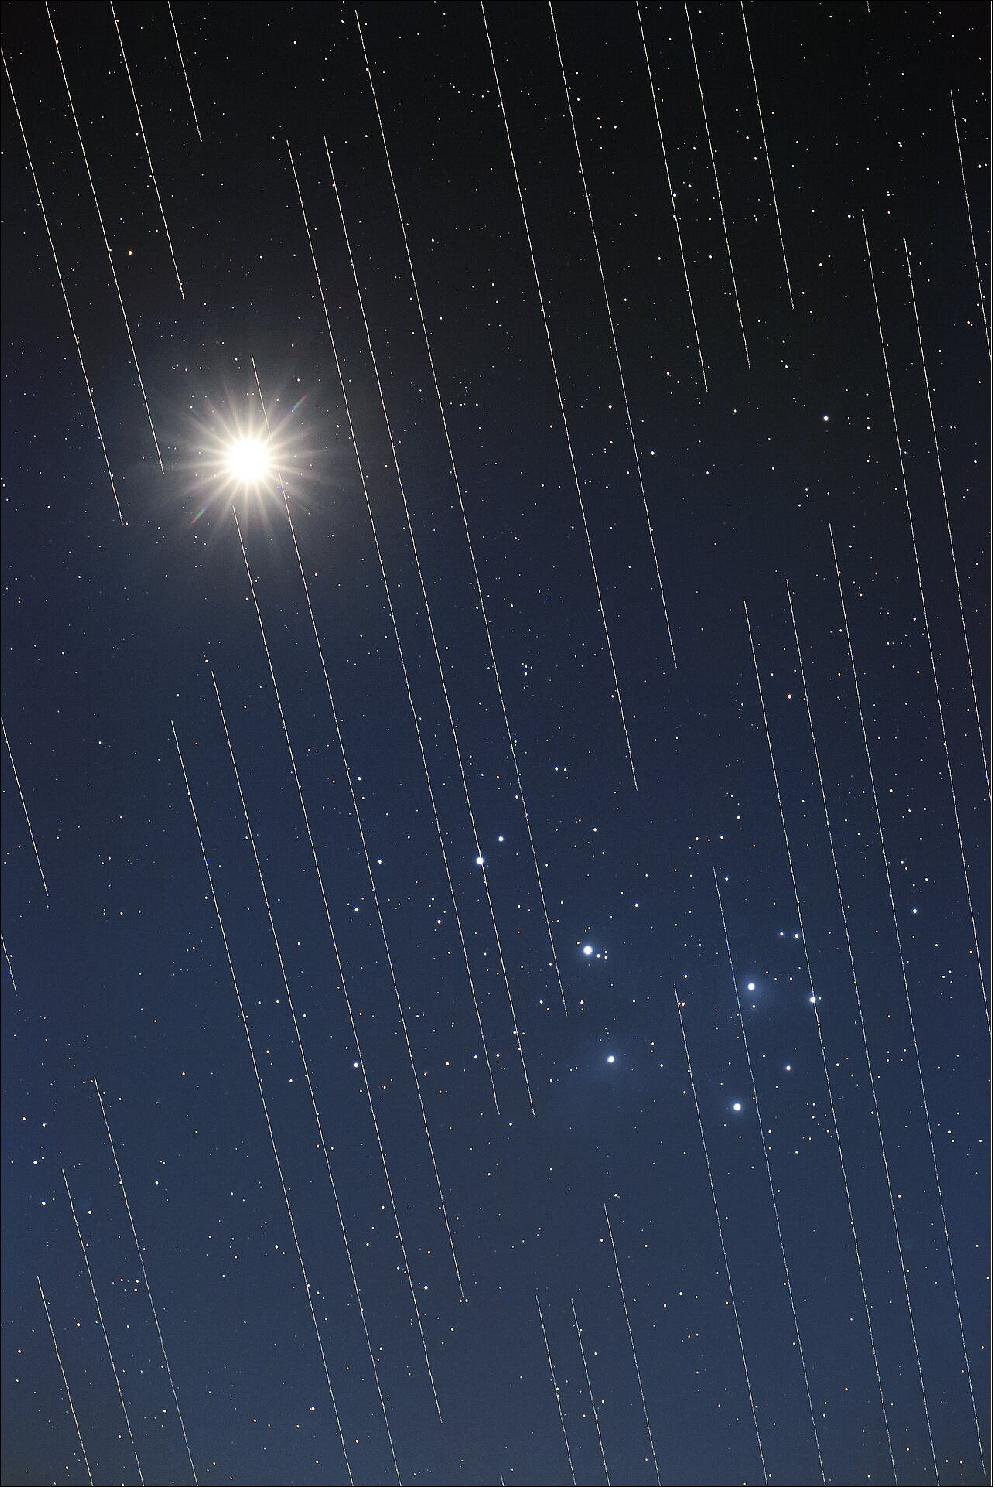 Figure 3: This image of Venus and the Pleiades shows the tracks of Starlink satellites. The reflective surfaces of the satellites, coupled with the fact that they are orbiting around Earth, mean that astronomical observations that require very long exposures capture "tracks" of the satellites in their images. - his image by Torsten Hansen of Germany won third place in the 2021 IAU OAE Astrophotography Contest, category Light Pollution (image credit: T. Hansen/IAU OAE/Creative Commons Attribution)